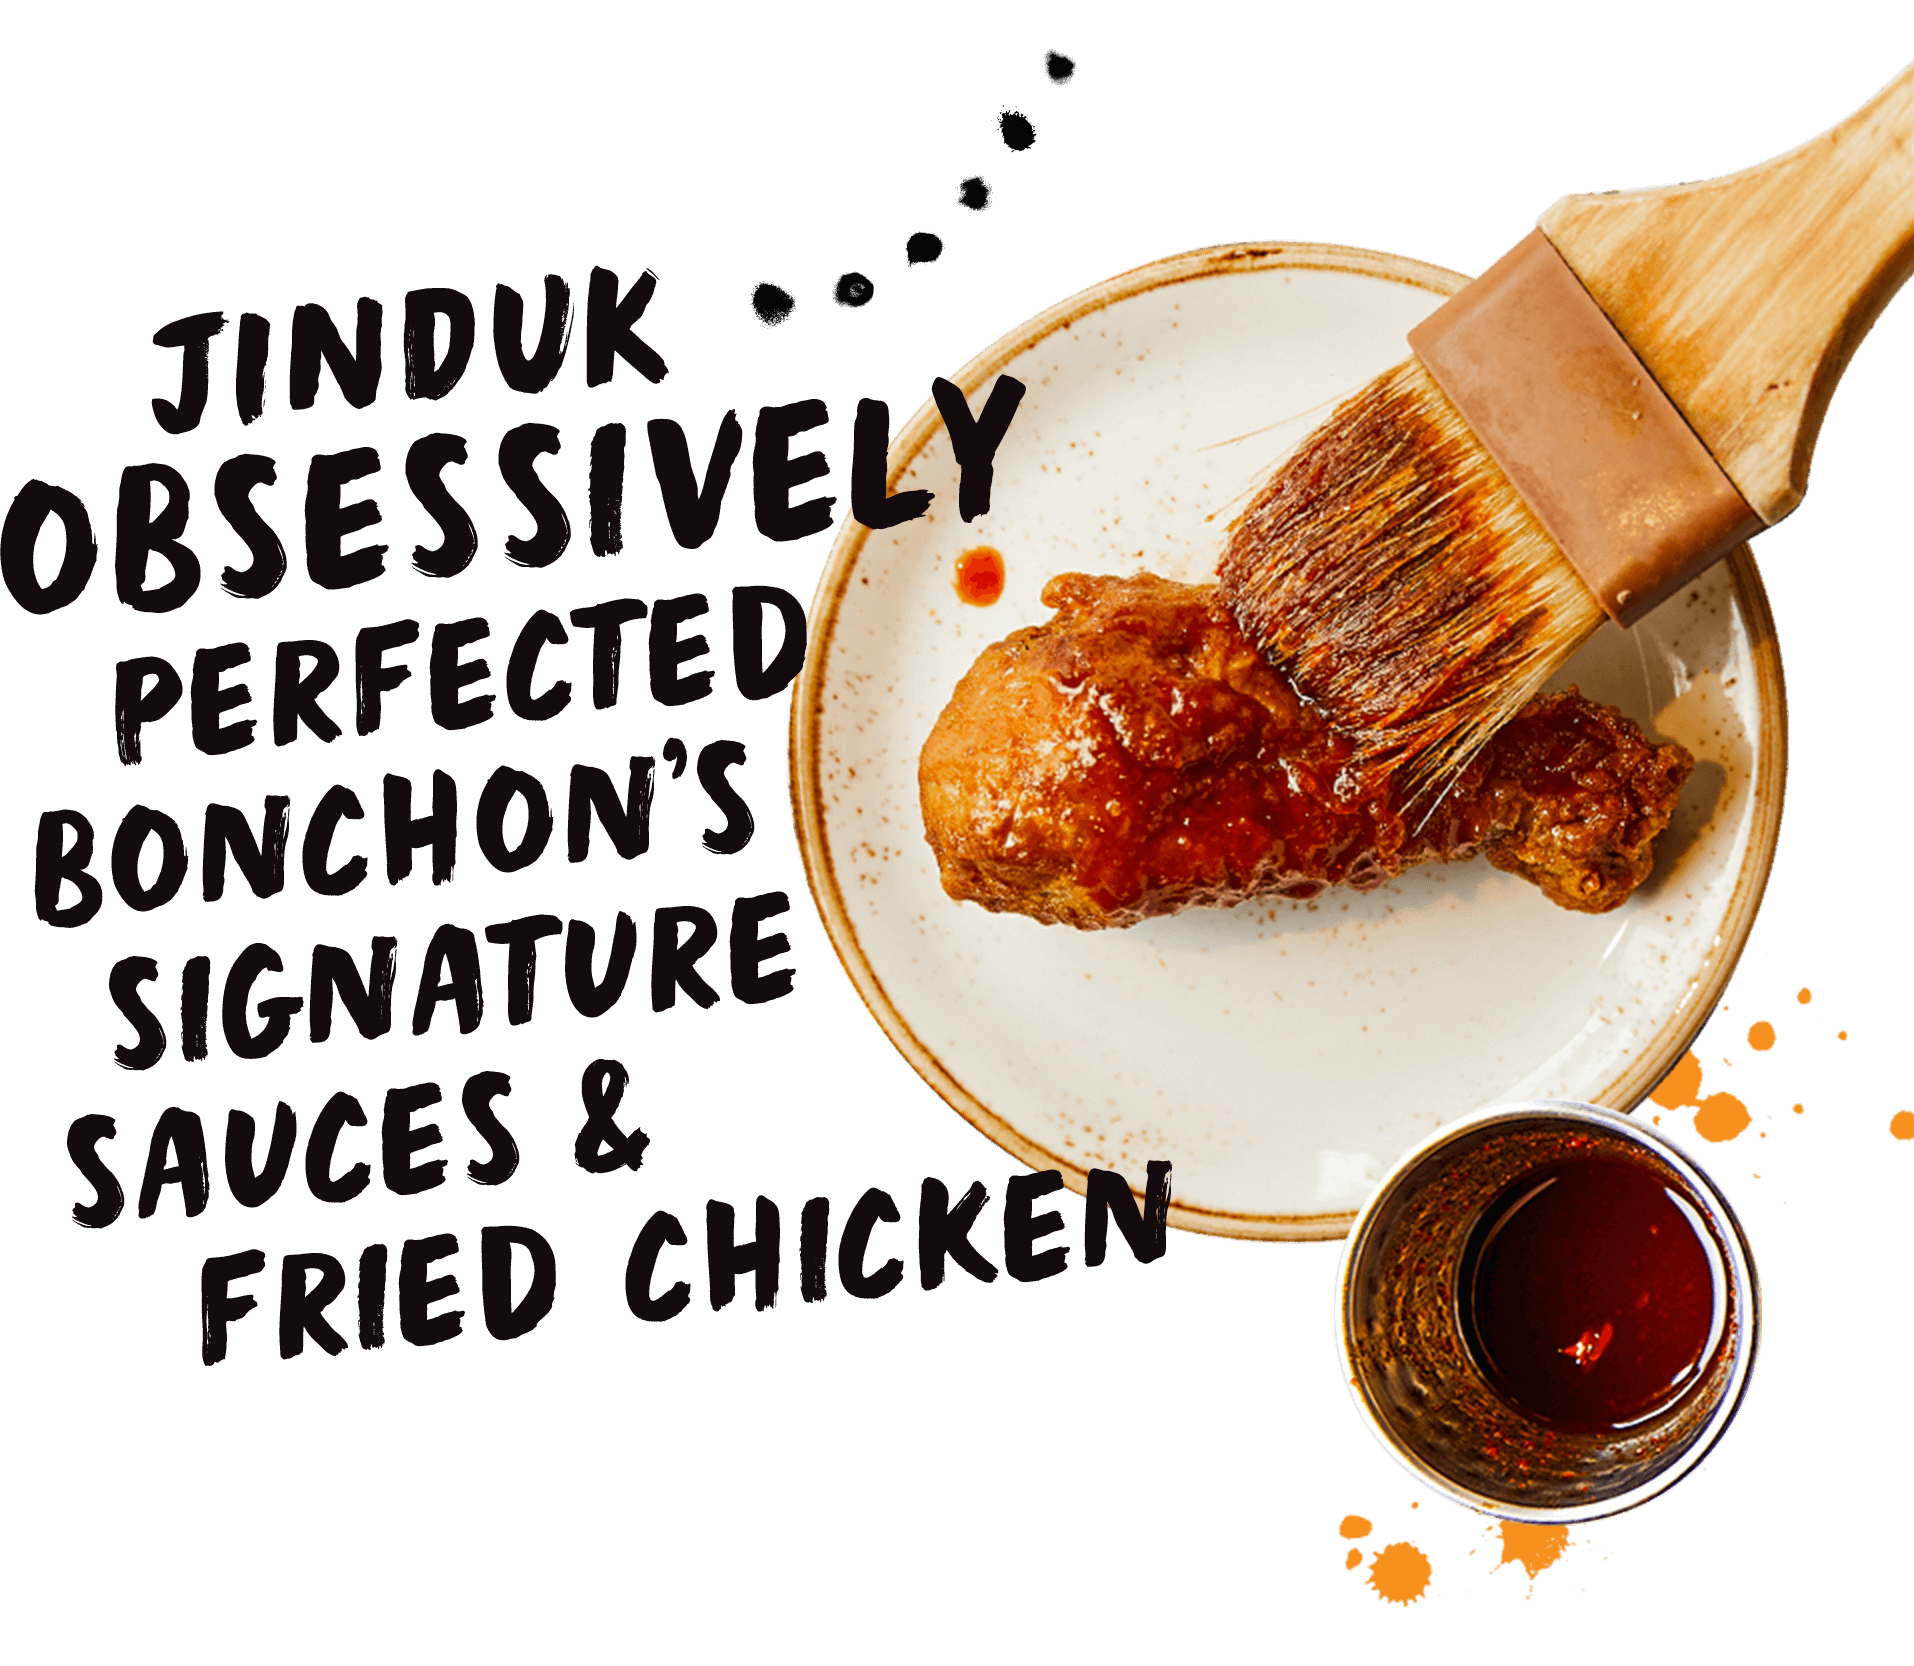 Jinduk obsessively perfected bonchon’s signature sauces & fried chicken